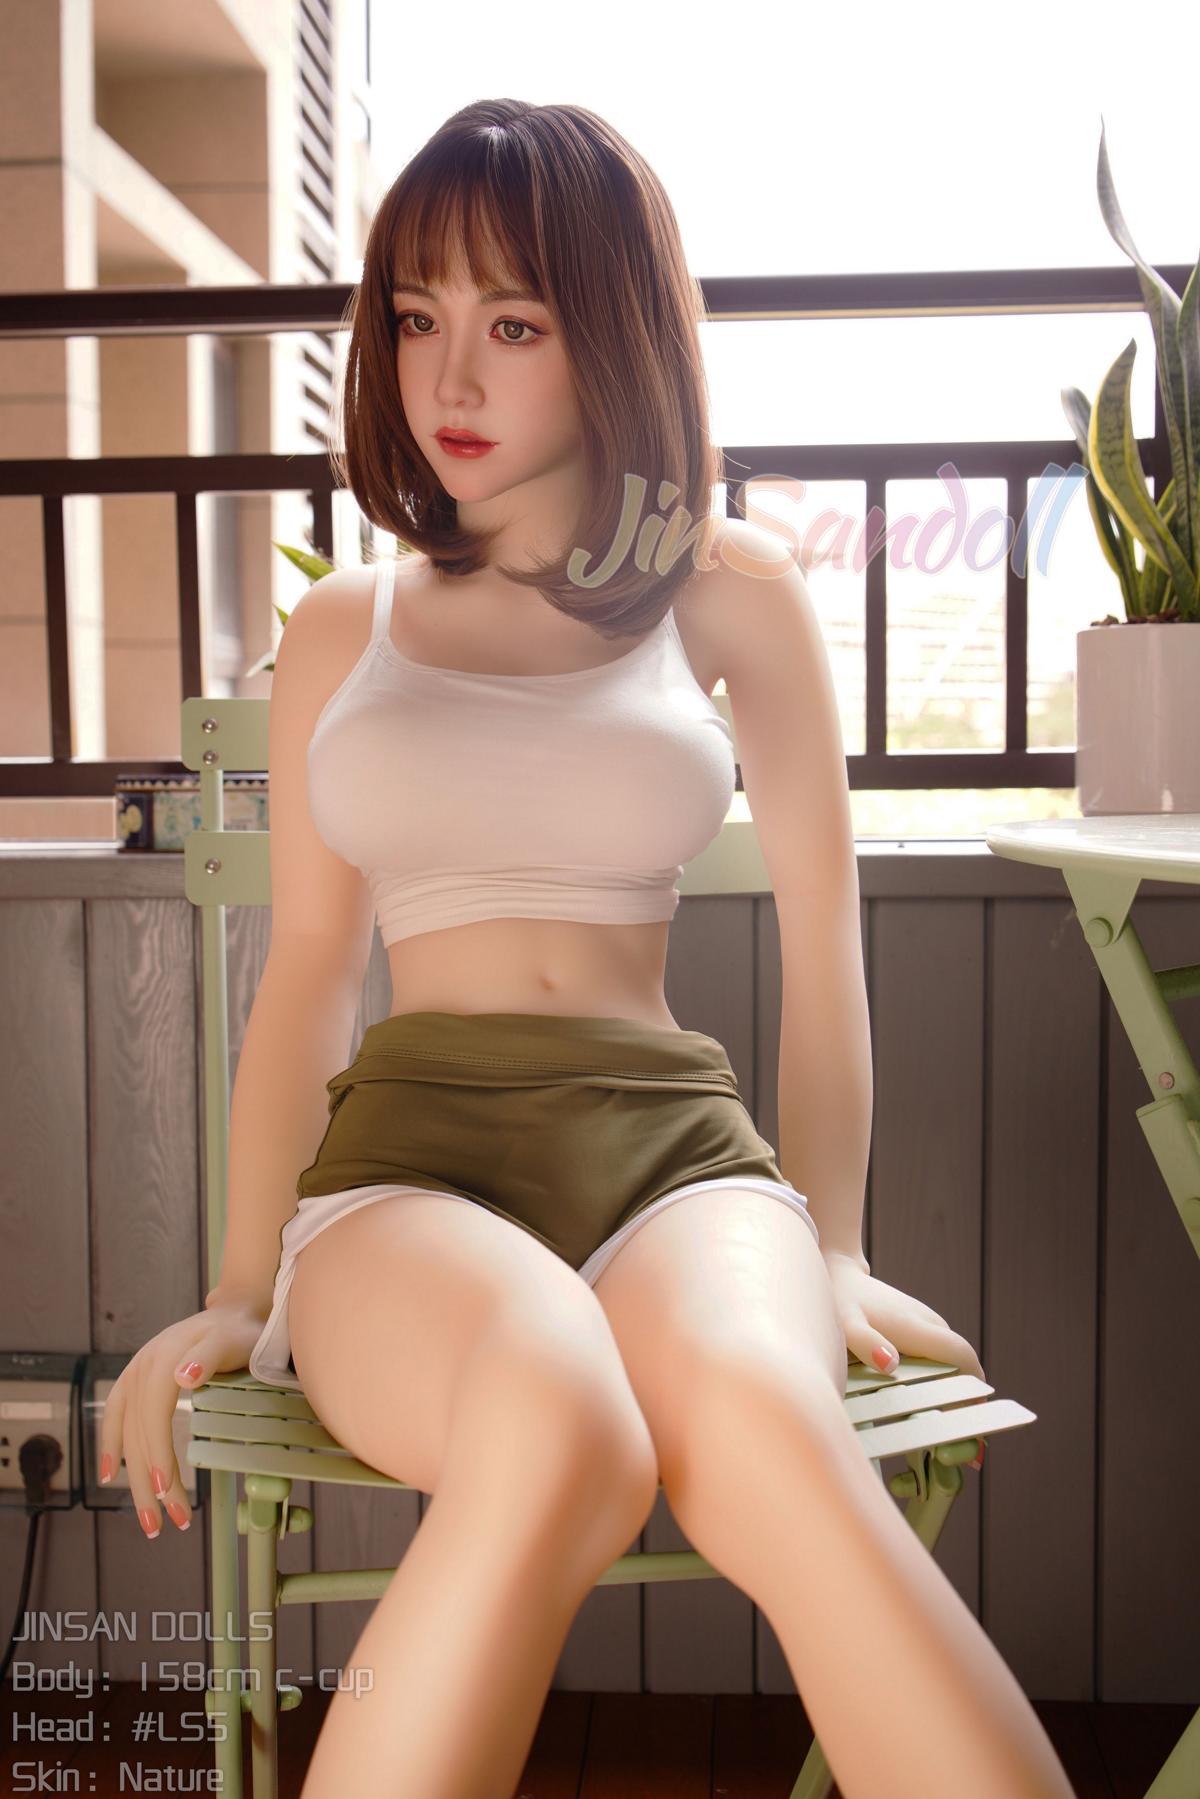 Sex Doll Lucy | The Beautiful Asian Real Doll